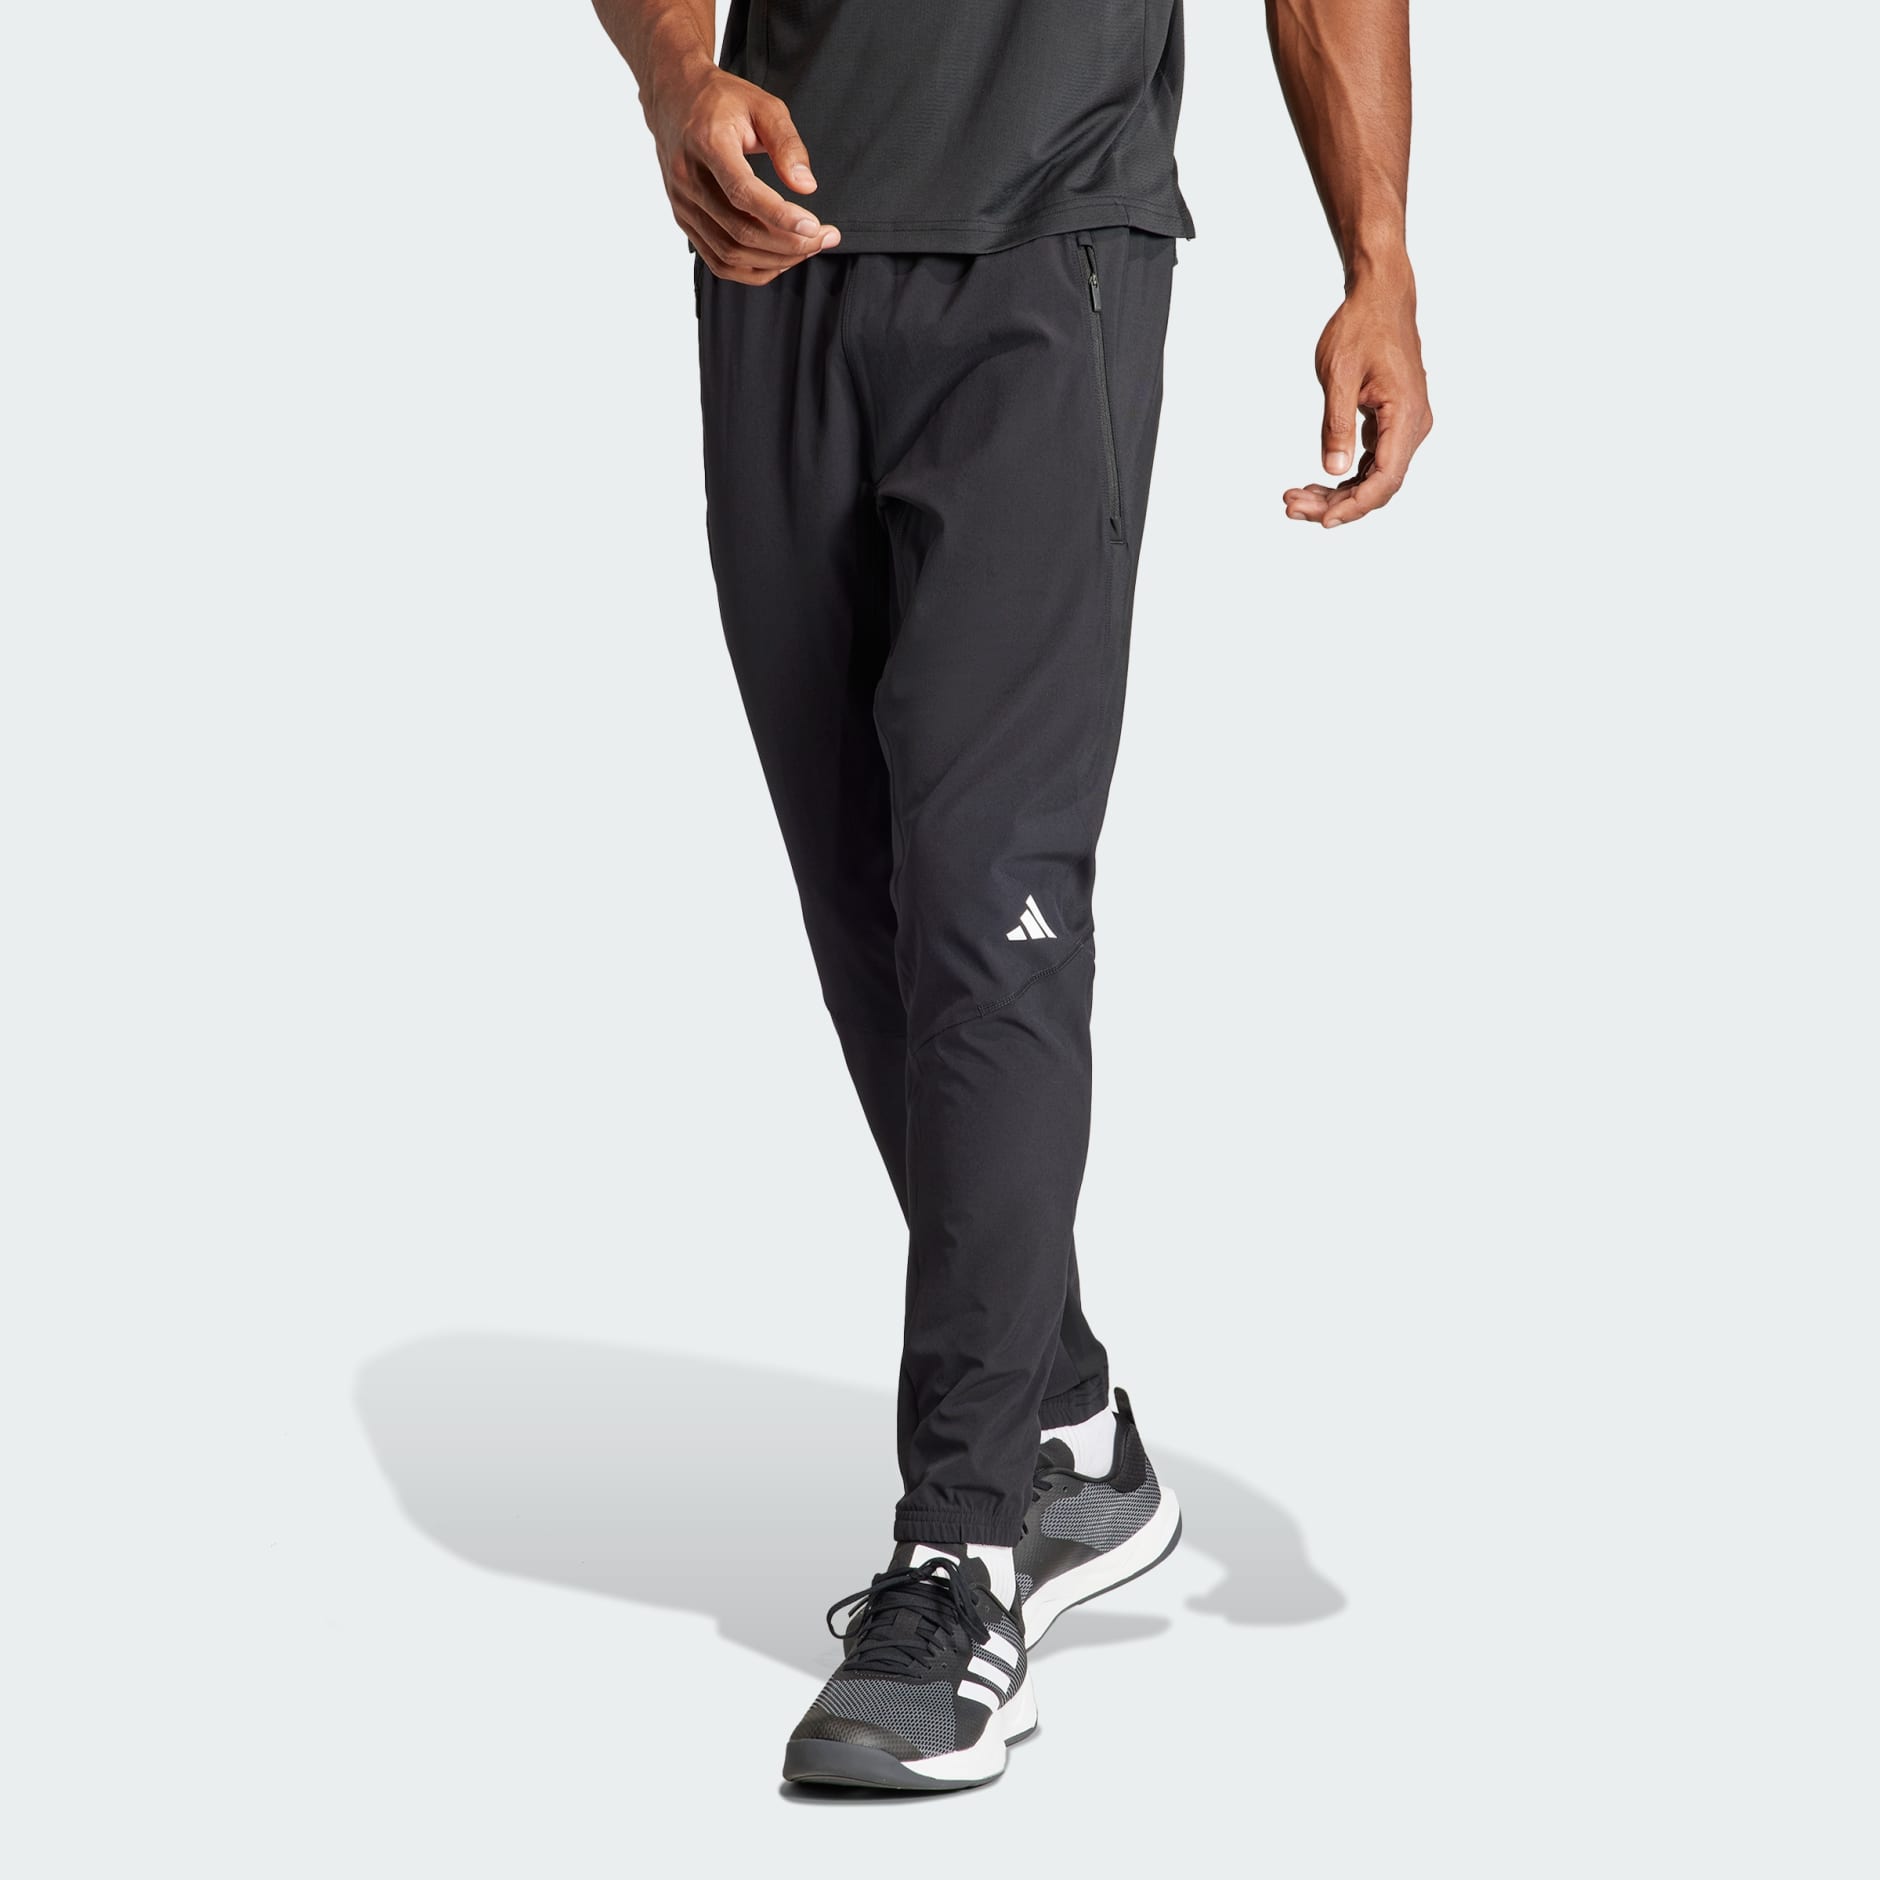 Black Adidas Premium Track Pant in Mumbai at best price by B S Sports -  Justdial